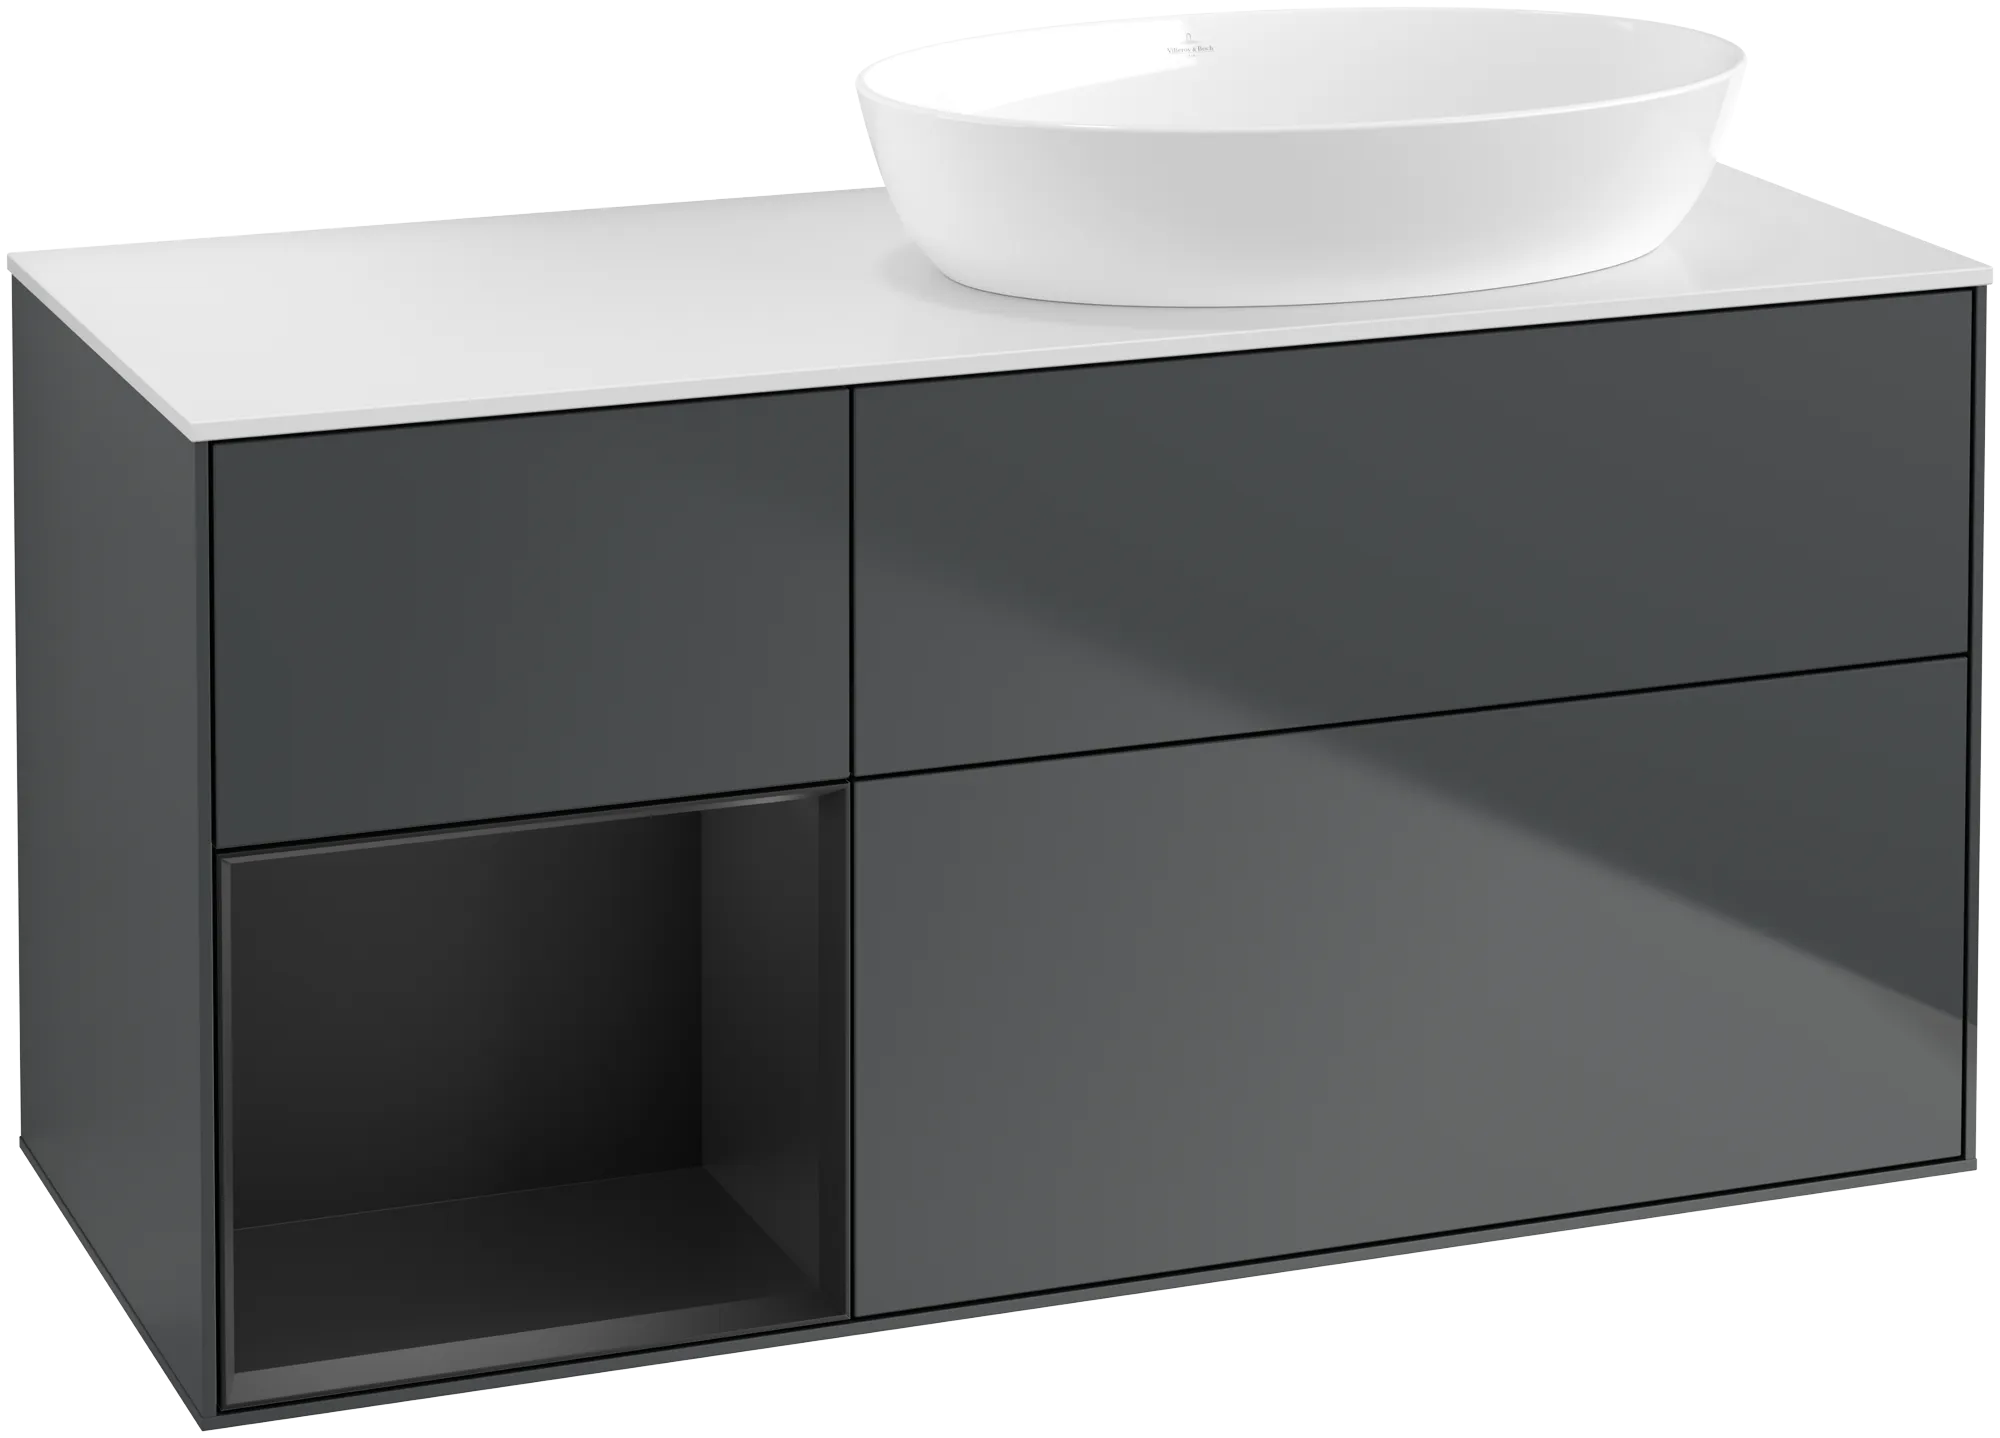 Picture of VILLEROY BOCH Finion Vanity unit, with lighting, 3 pull-out compartments, 1200 x 603 x 501 mm, Midnight Blue Matt Lacquer / Black Matt Lacquer / Glass White Matt #GA41PDHG